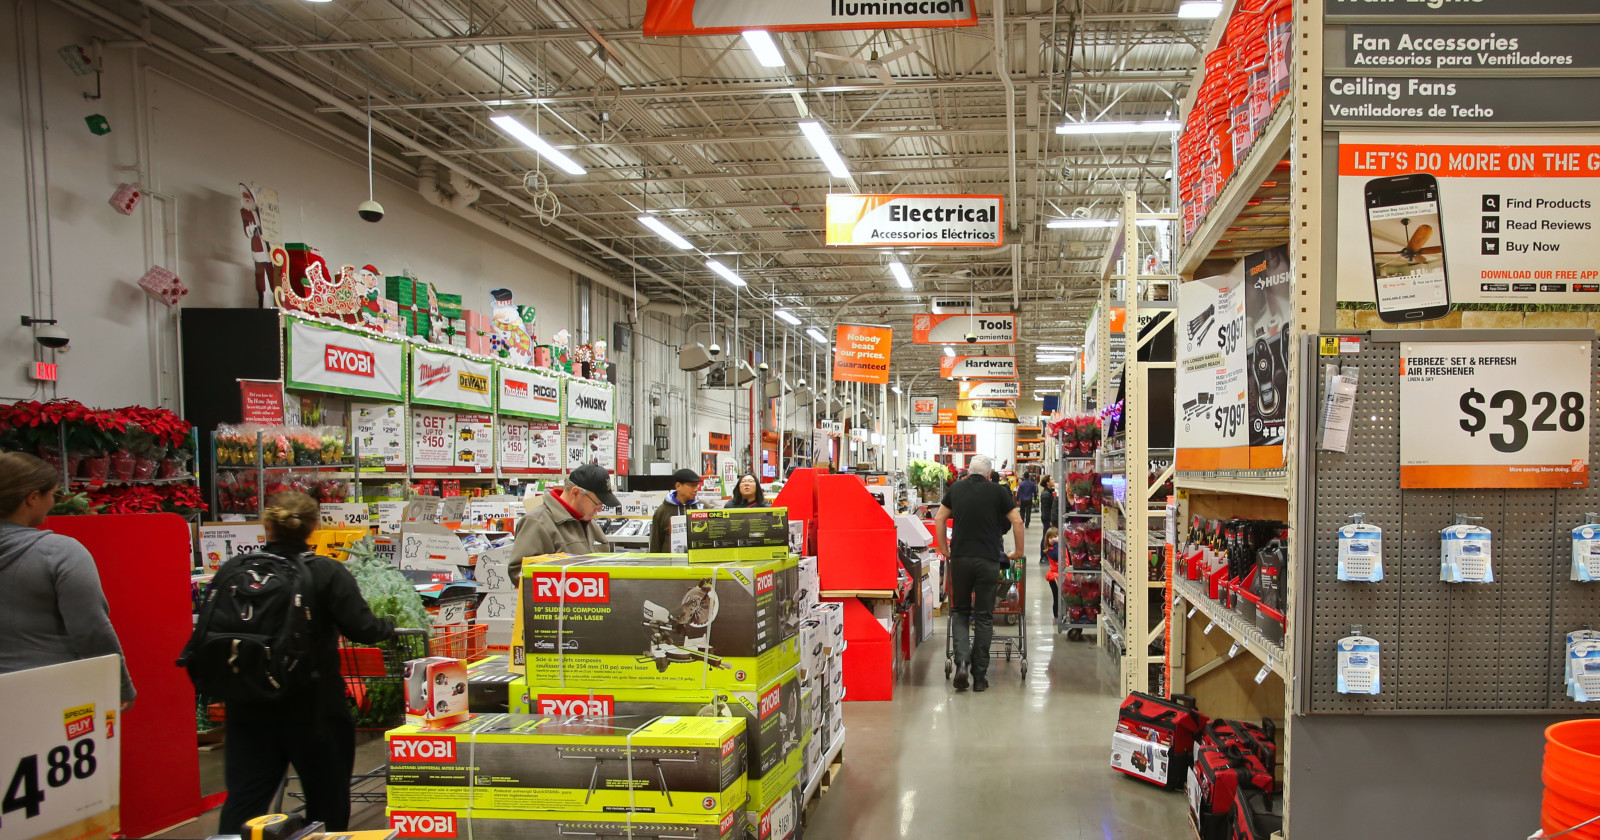 Does Home Depot Match Paint In 2022? [Your Full Guide]